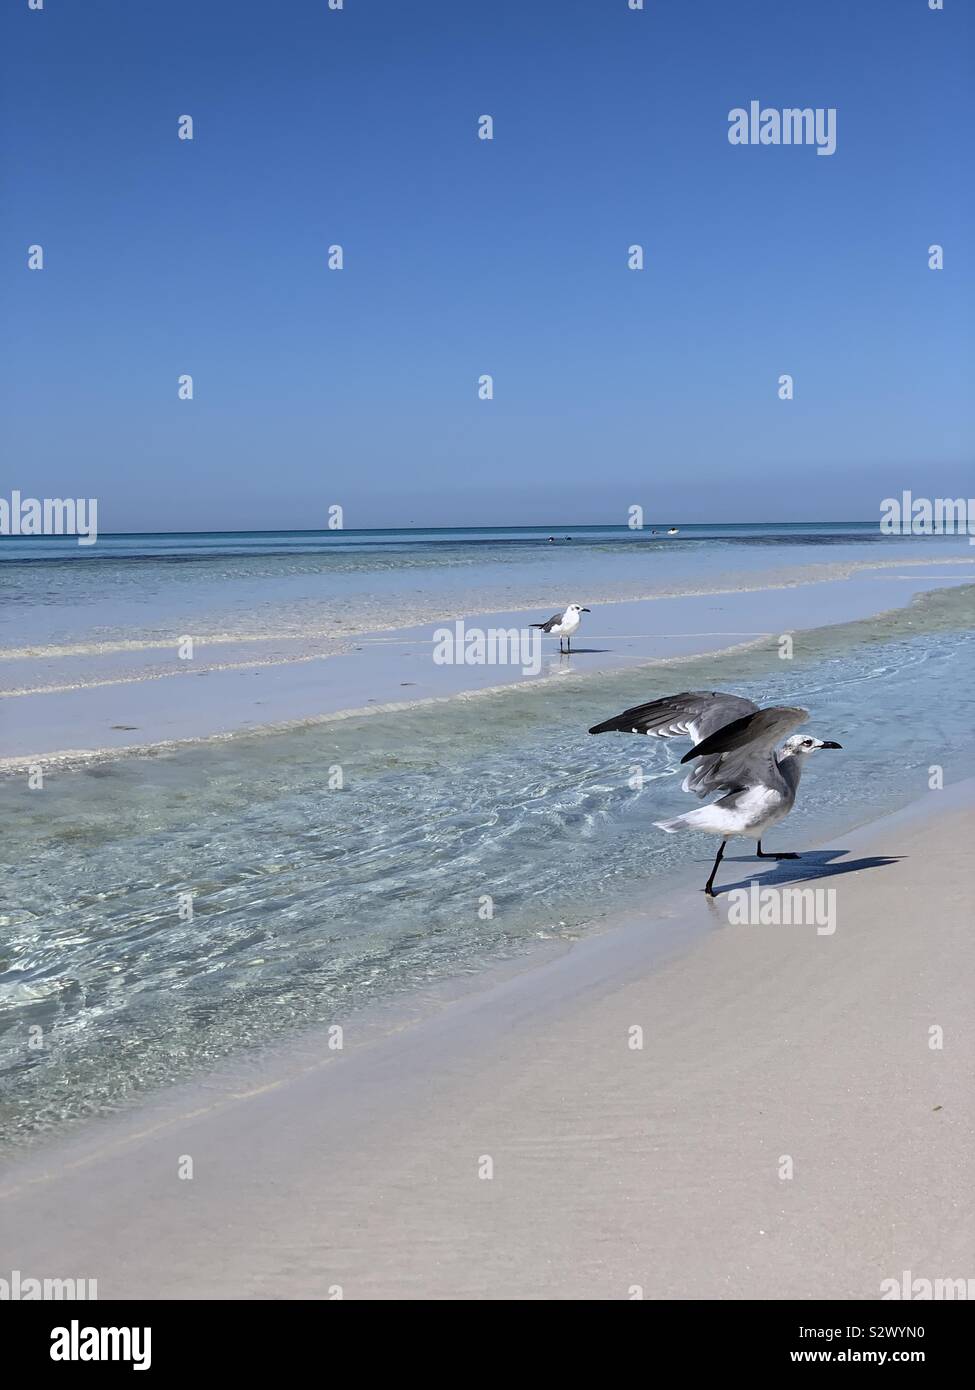 Waterscape of turquoise ocean water with sandbars and shorebirds on the sand Stock Photo